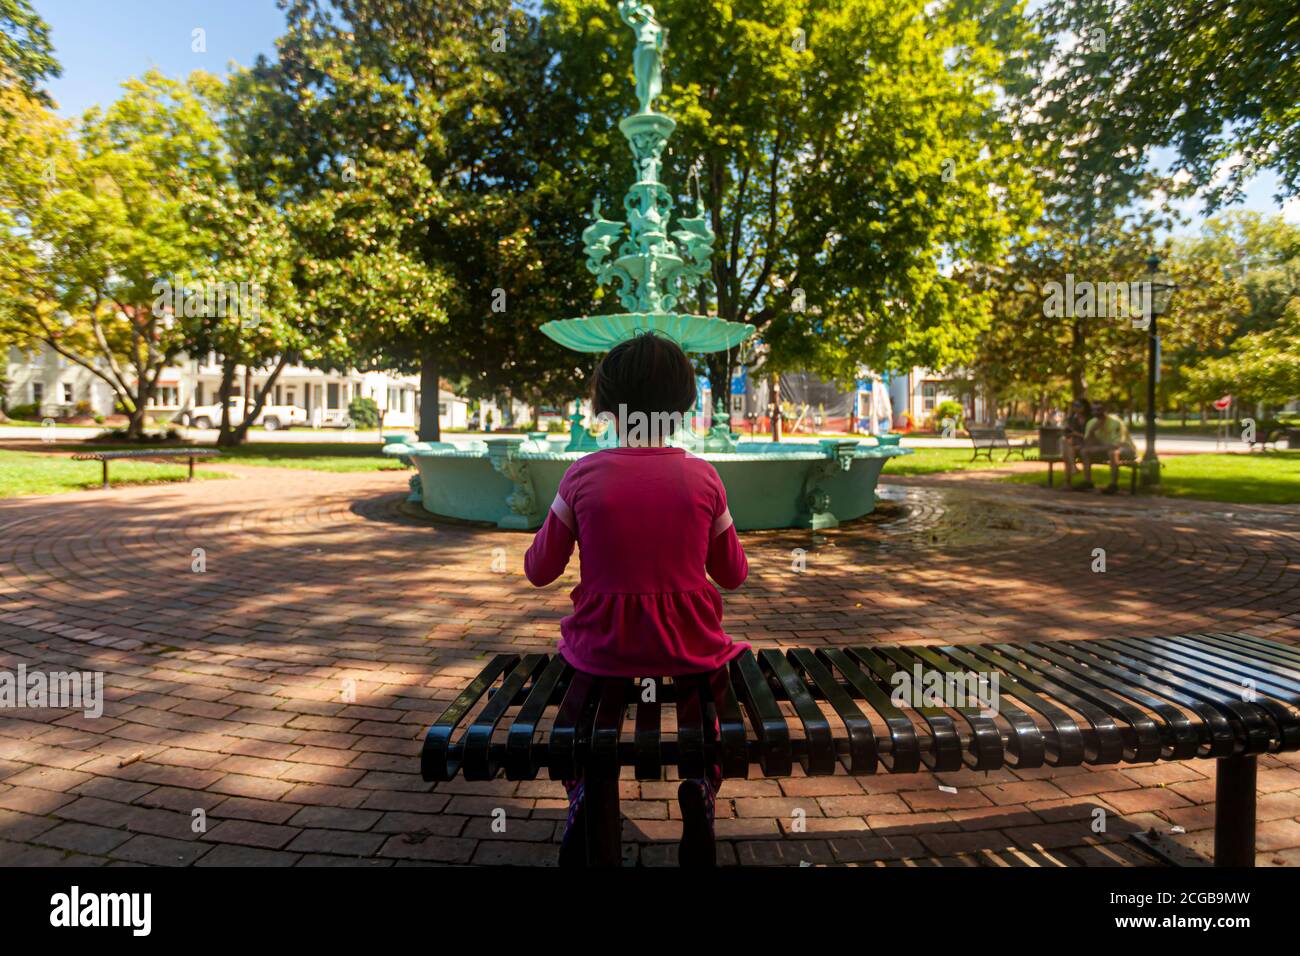 A little girl wearing pink casual clothing is sitting alone on a metal bench in the Fountain Park of Chestertown, Maryland. In the blurred background Stock Photo